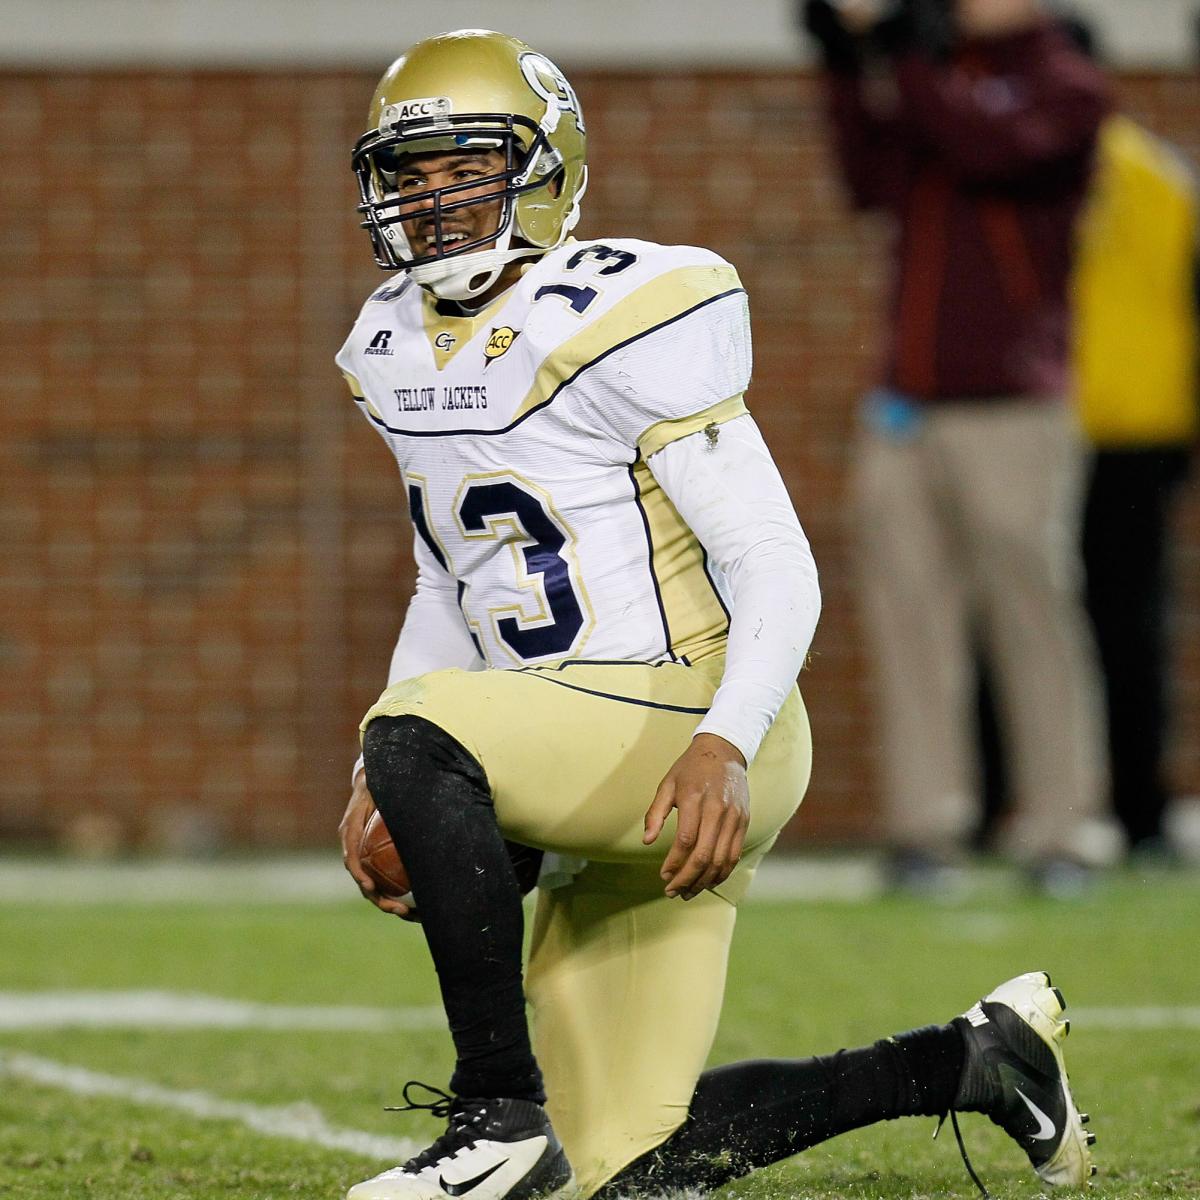 2012 Georgia Tech Yellow Jackets Football: Predictions and Odds to Win